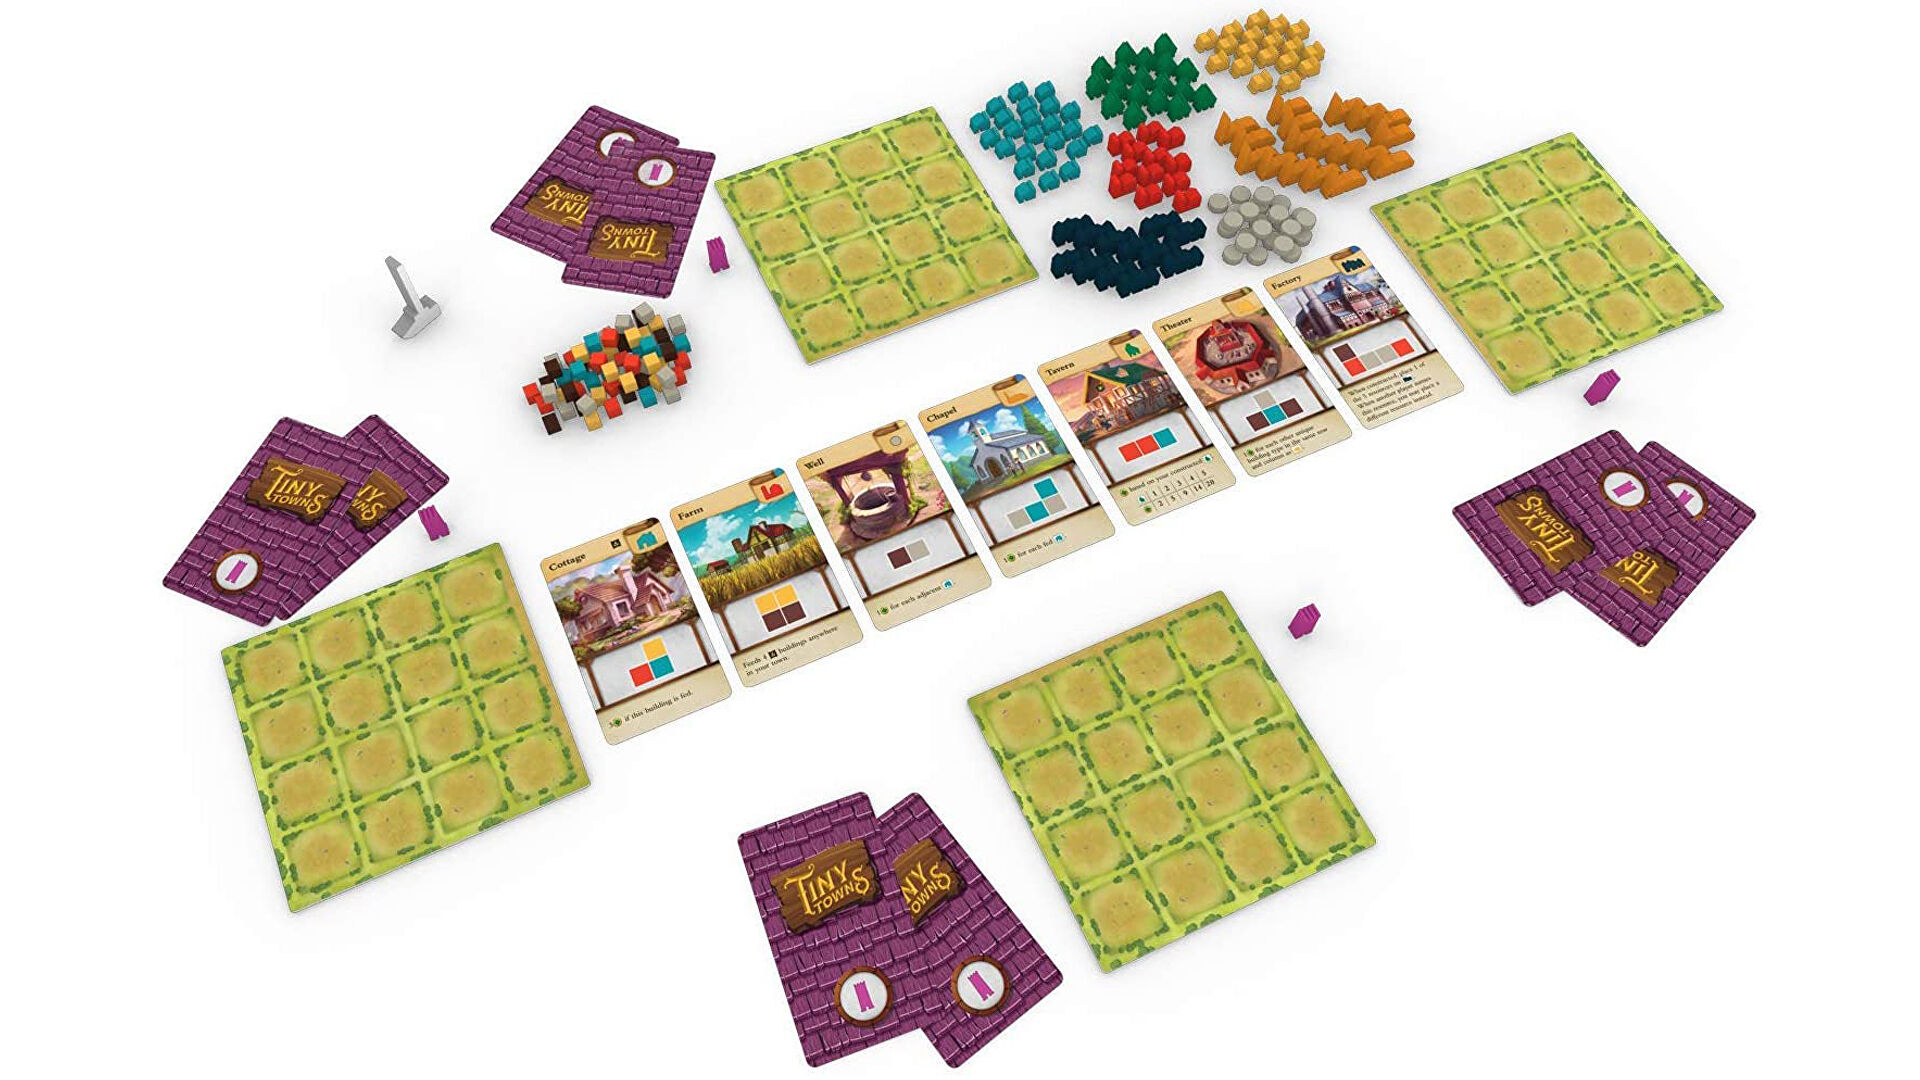 tiny-towns-board-game-gameplay-layout.jpg